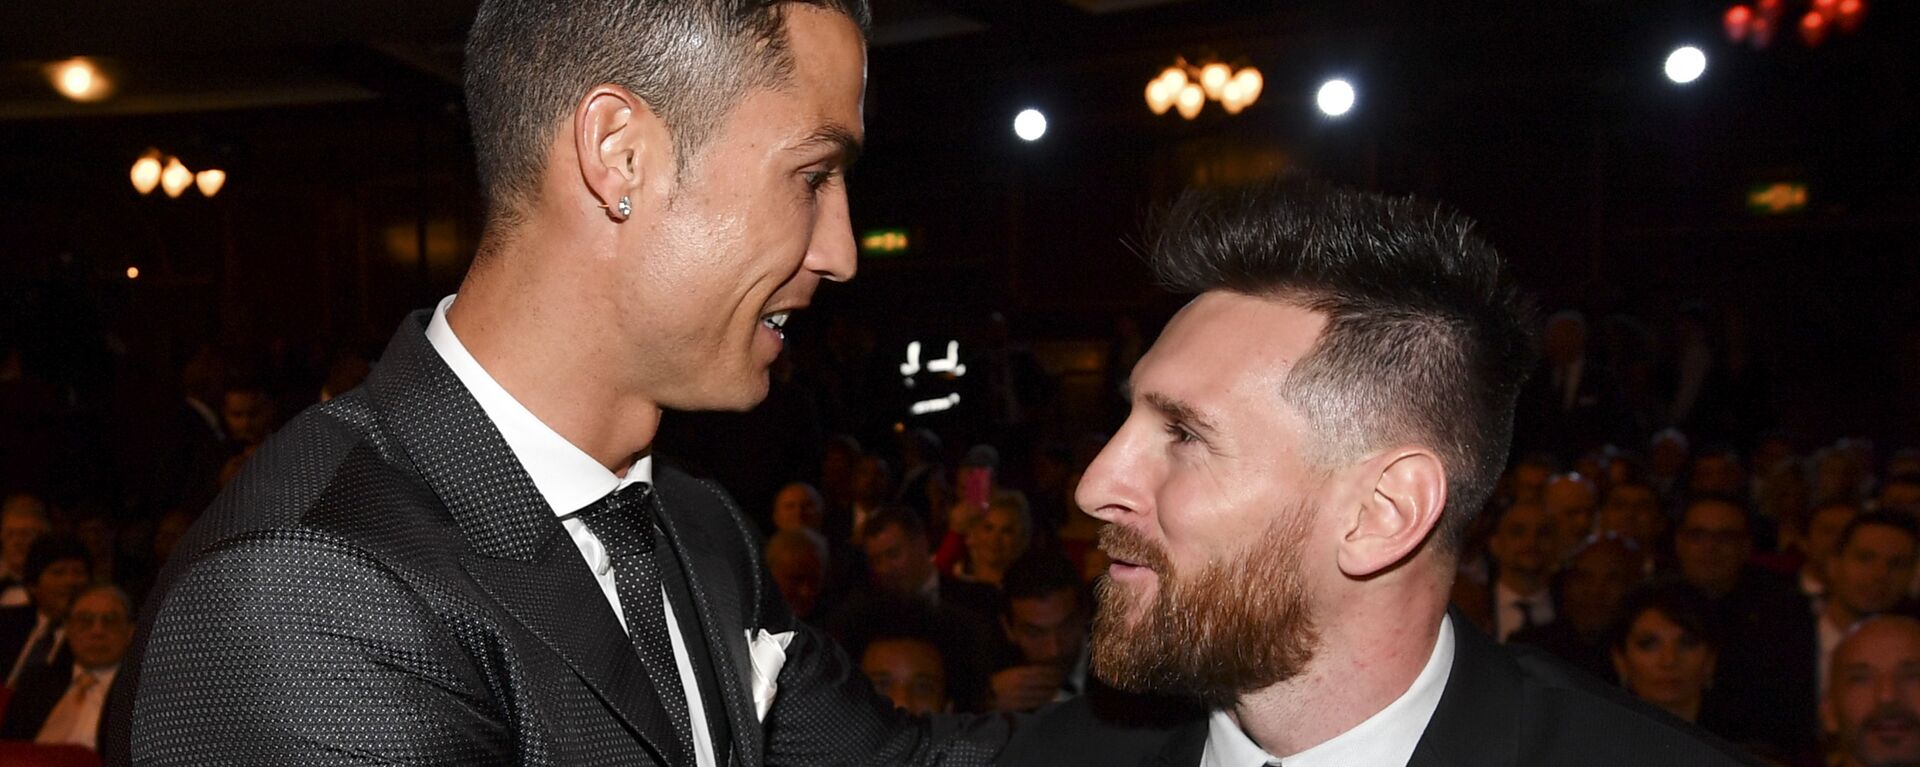 Nominees for the Best FIFA football player, Barcelona and Argentina forward Lionel Messi (R) and Real Madrid and Portugal forward Cristiano Ronaldo (L) chat before taking their seats for The Best FIFA Football Awards ceremony, on October 23, 2017 in London.  - اسپوتنیک افغانستان  , 1920, 20.09.2021